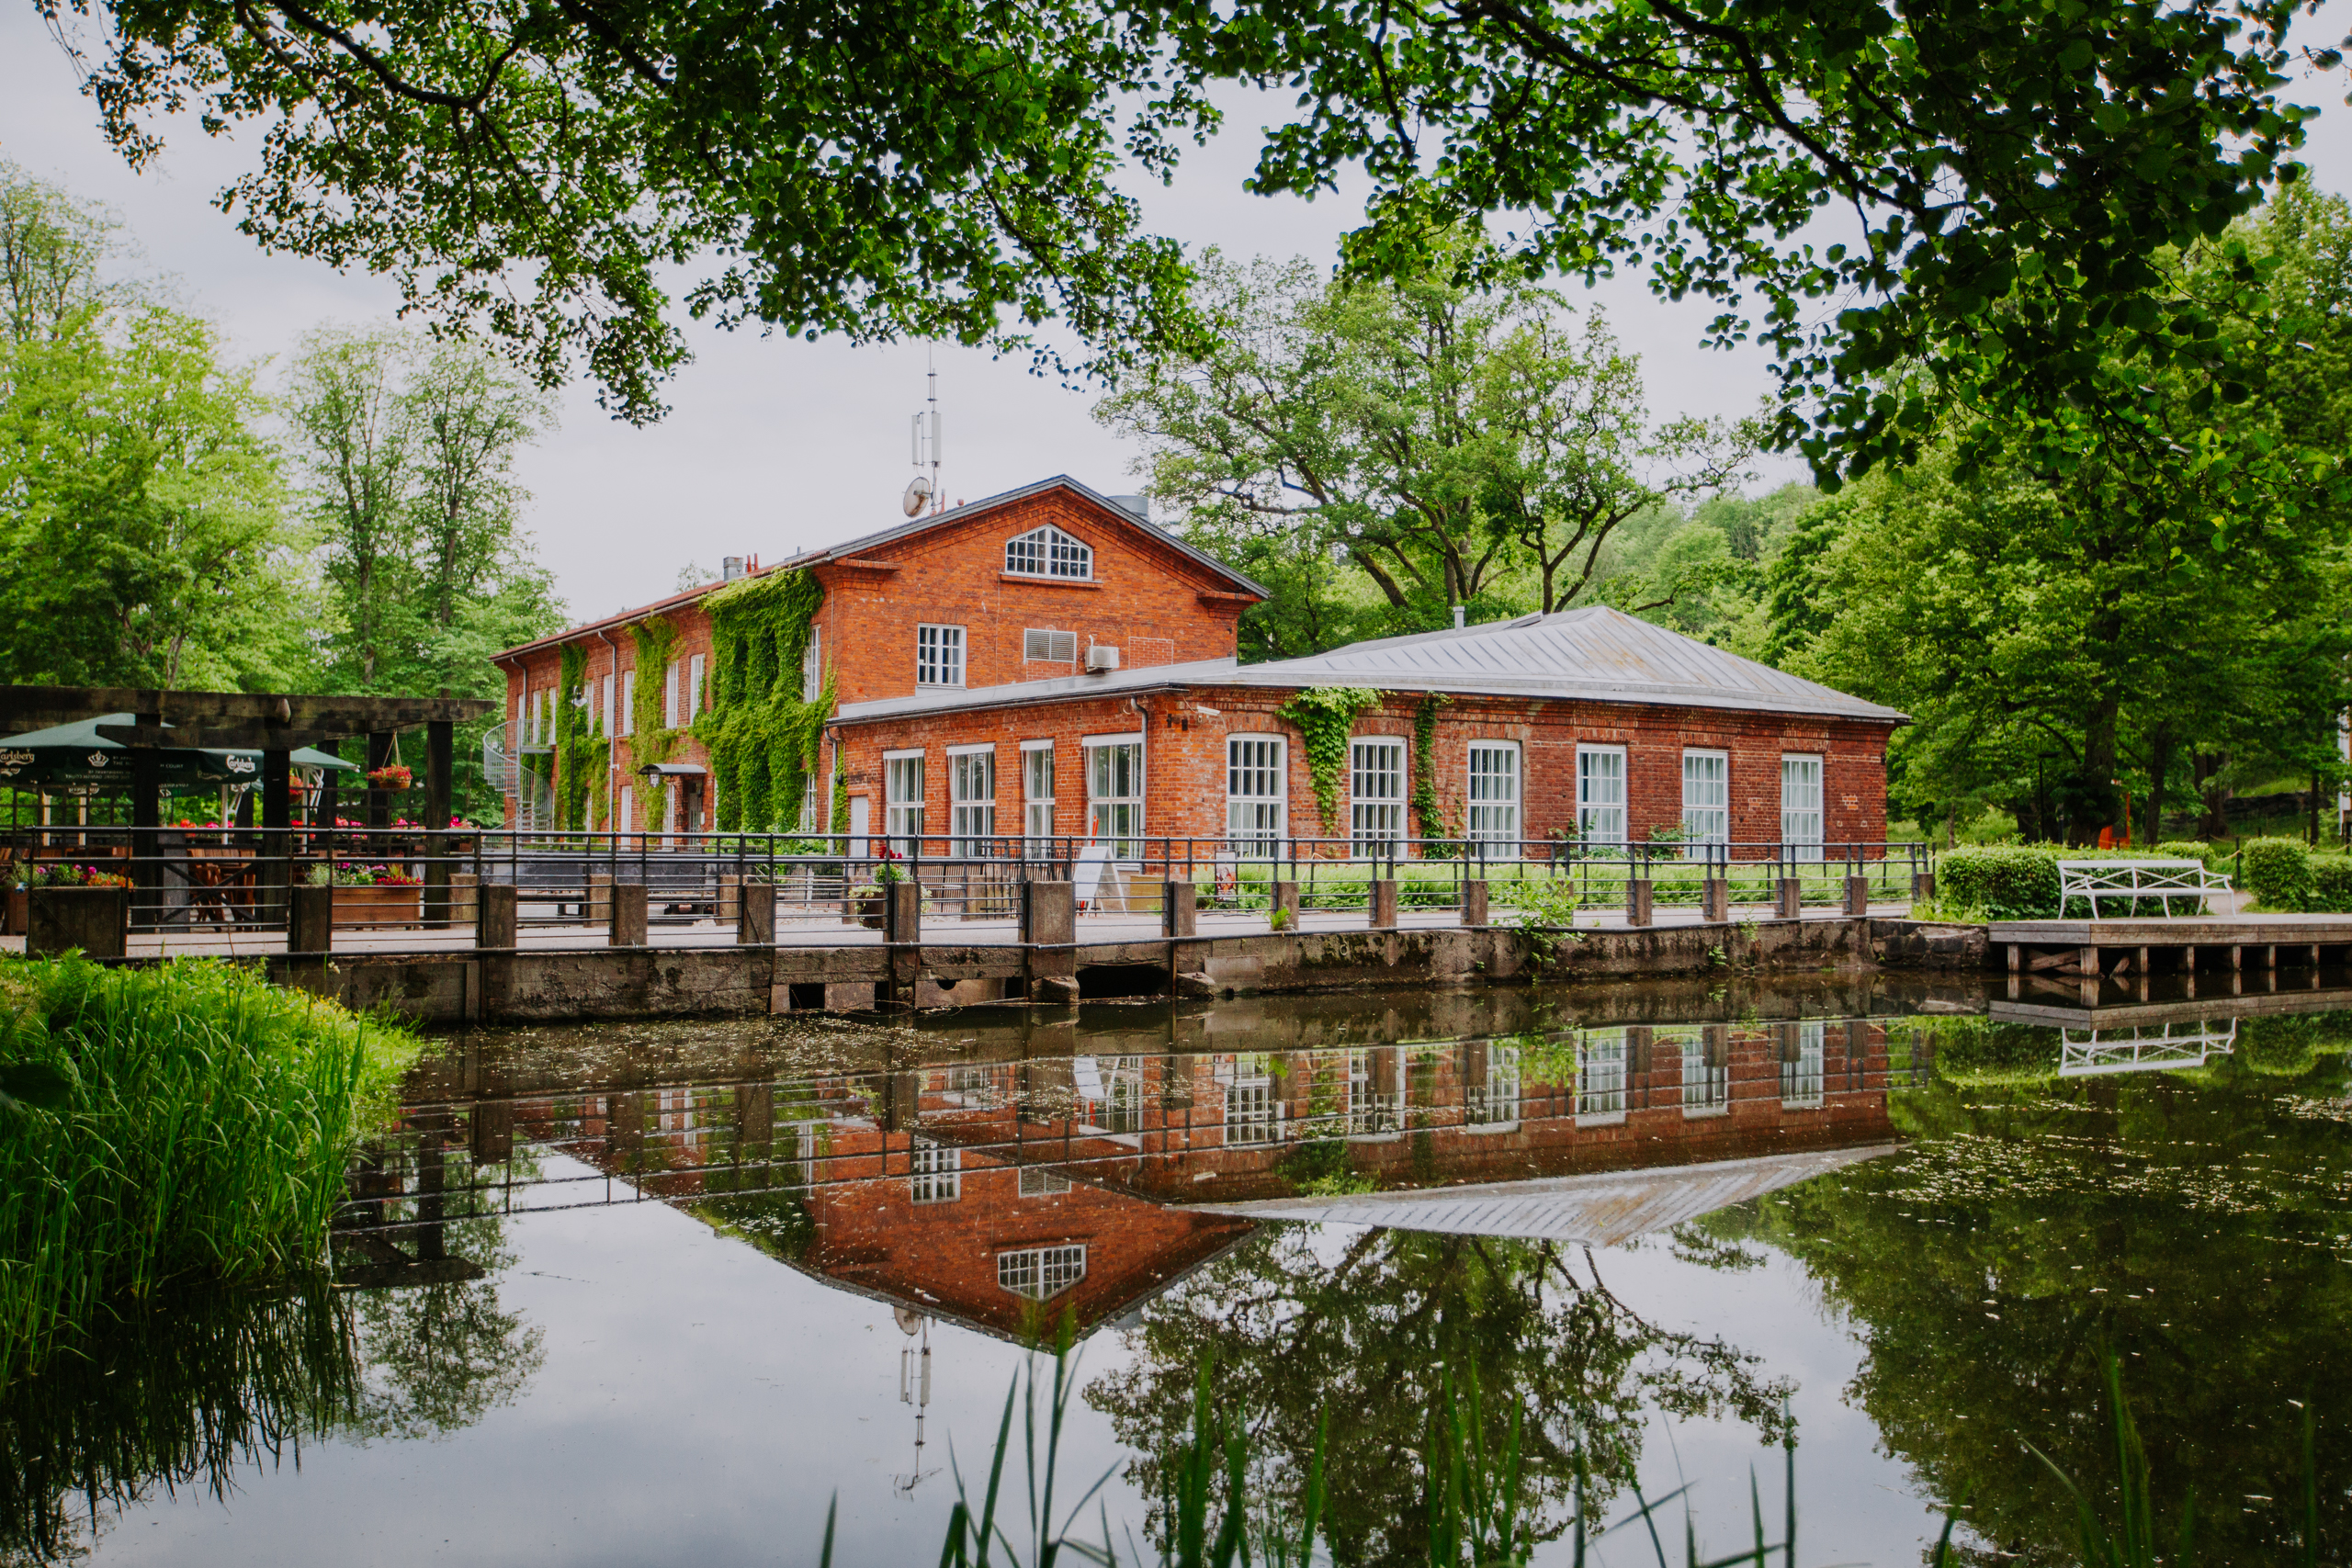 an ironworks building made of well-burned bricks next to a Fiskars river